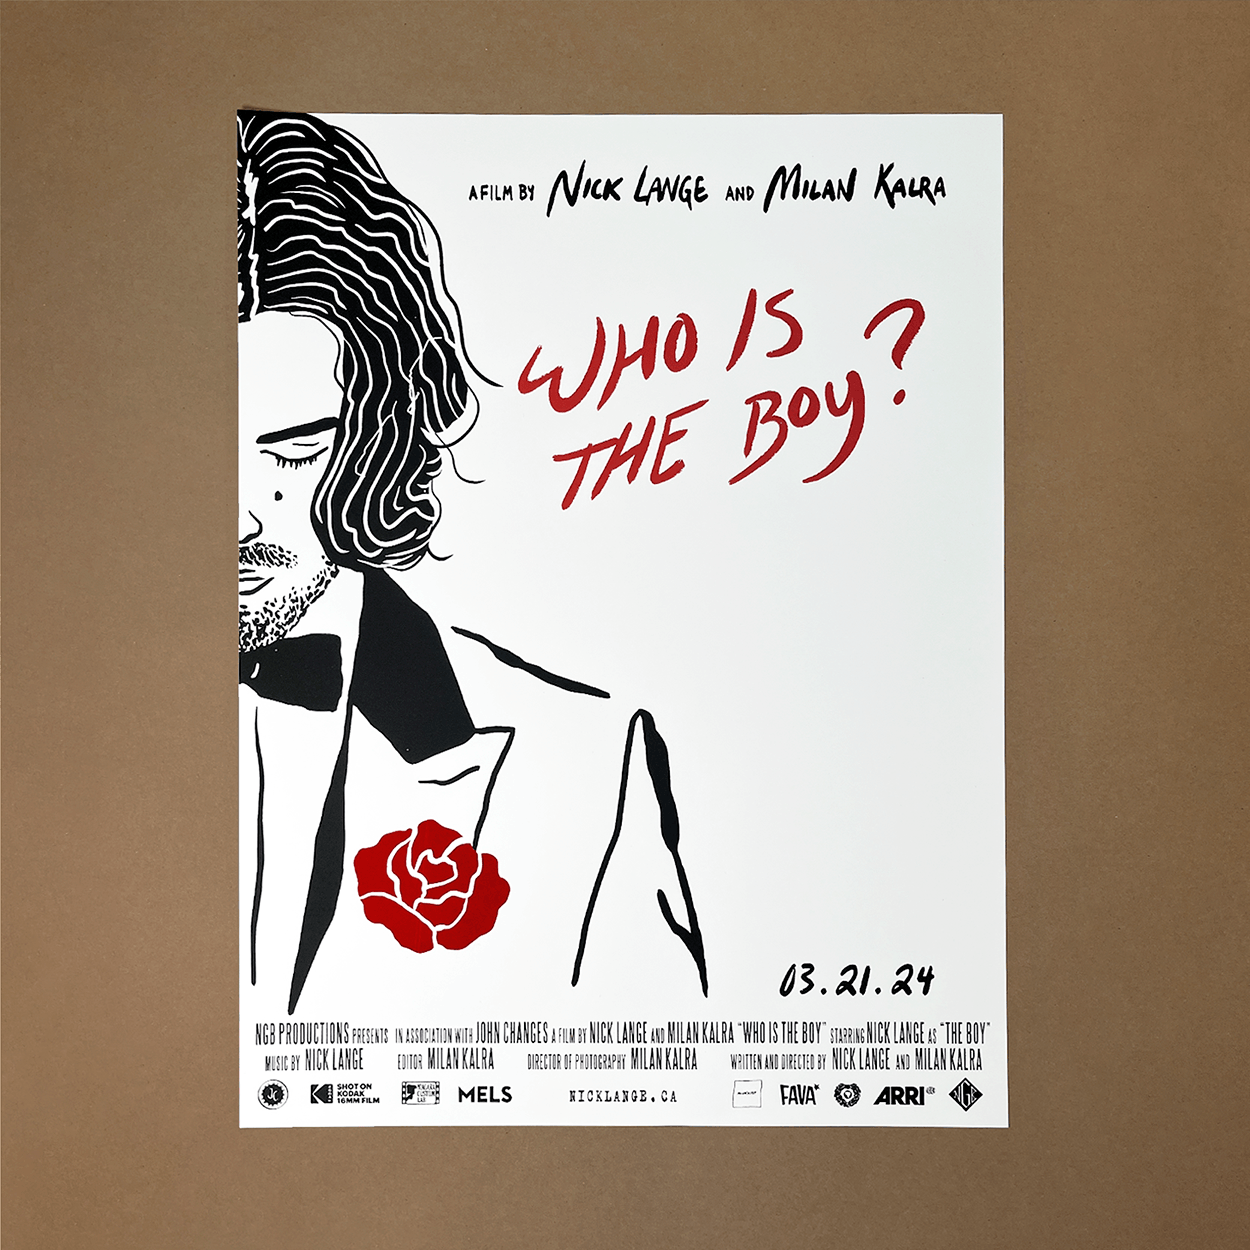 Hand screen printed event poster by Kid Icarus in Toronto for the film "Who is the Boy?" by Nick Lange and Milan Kalra, presented at the Yardbird Suite